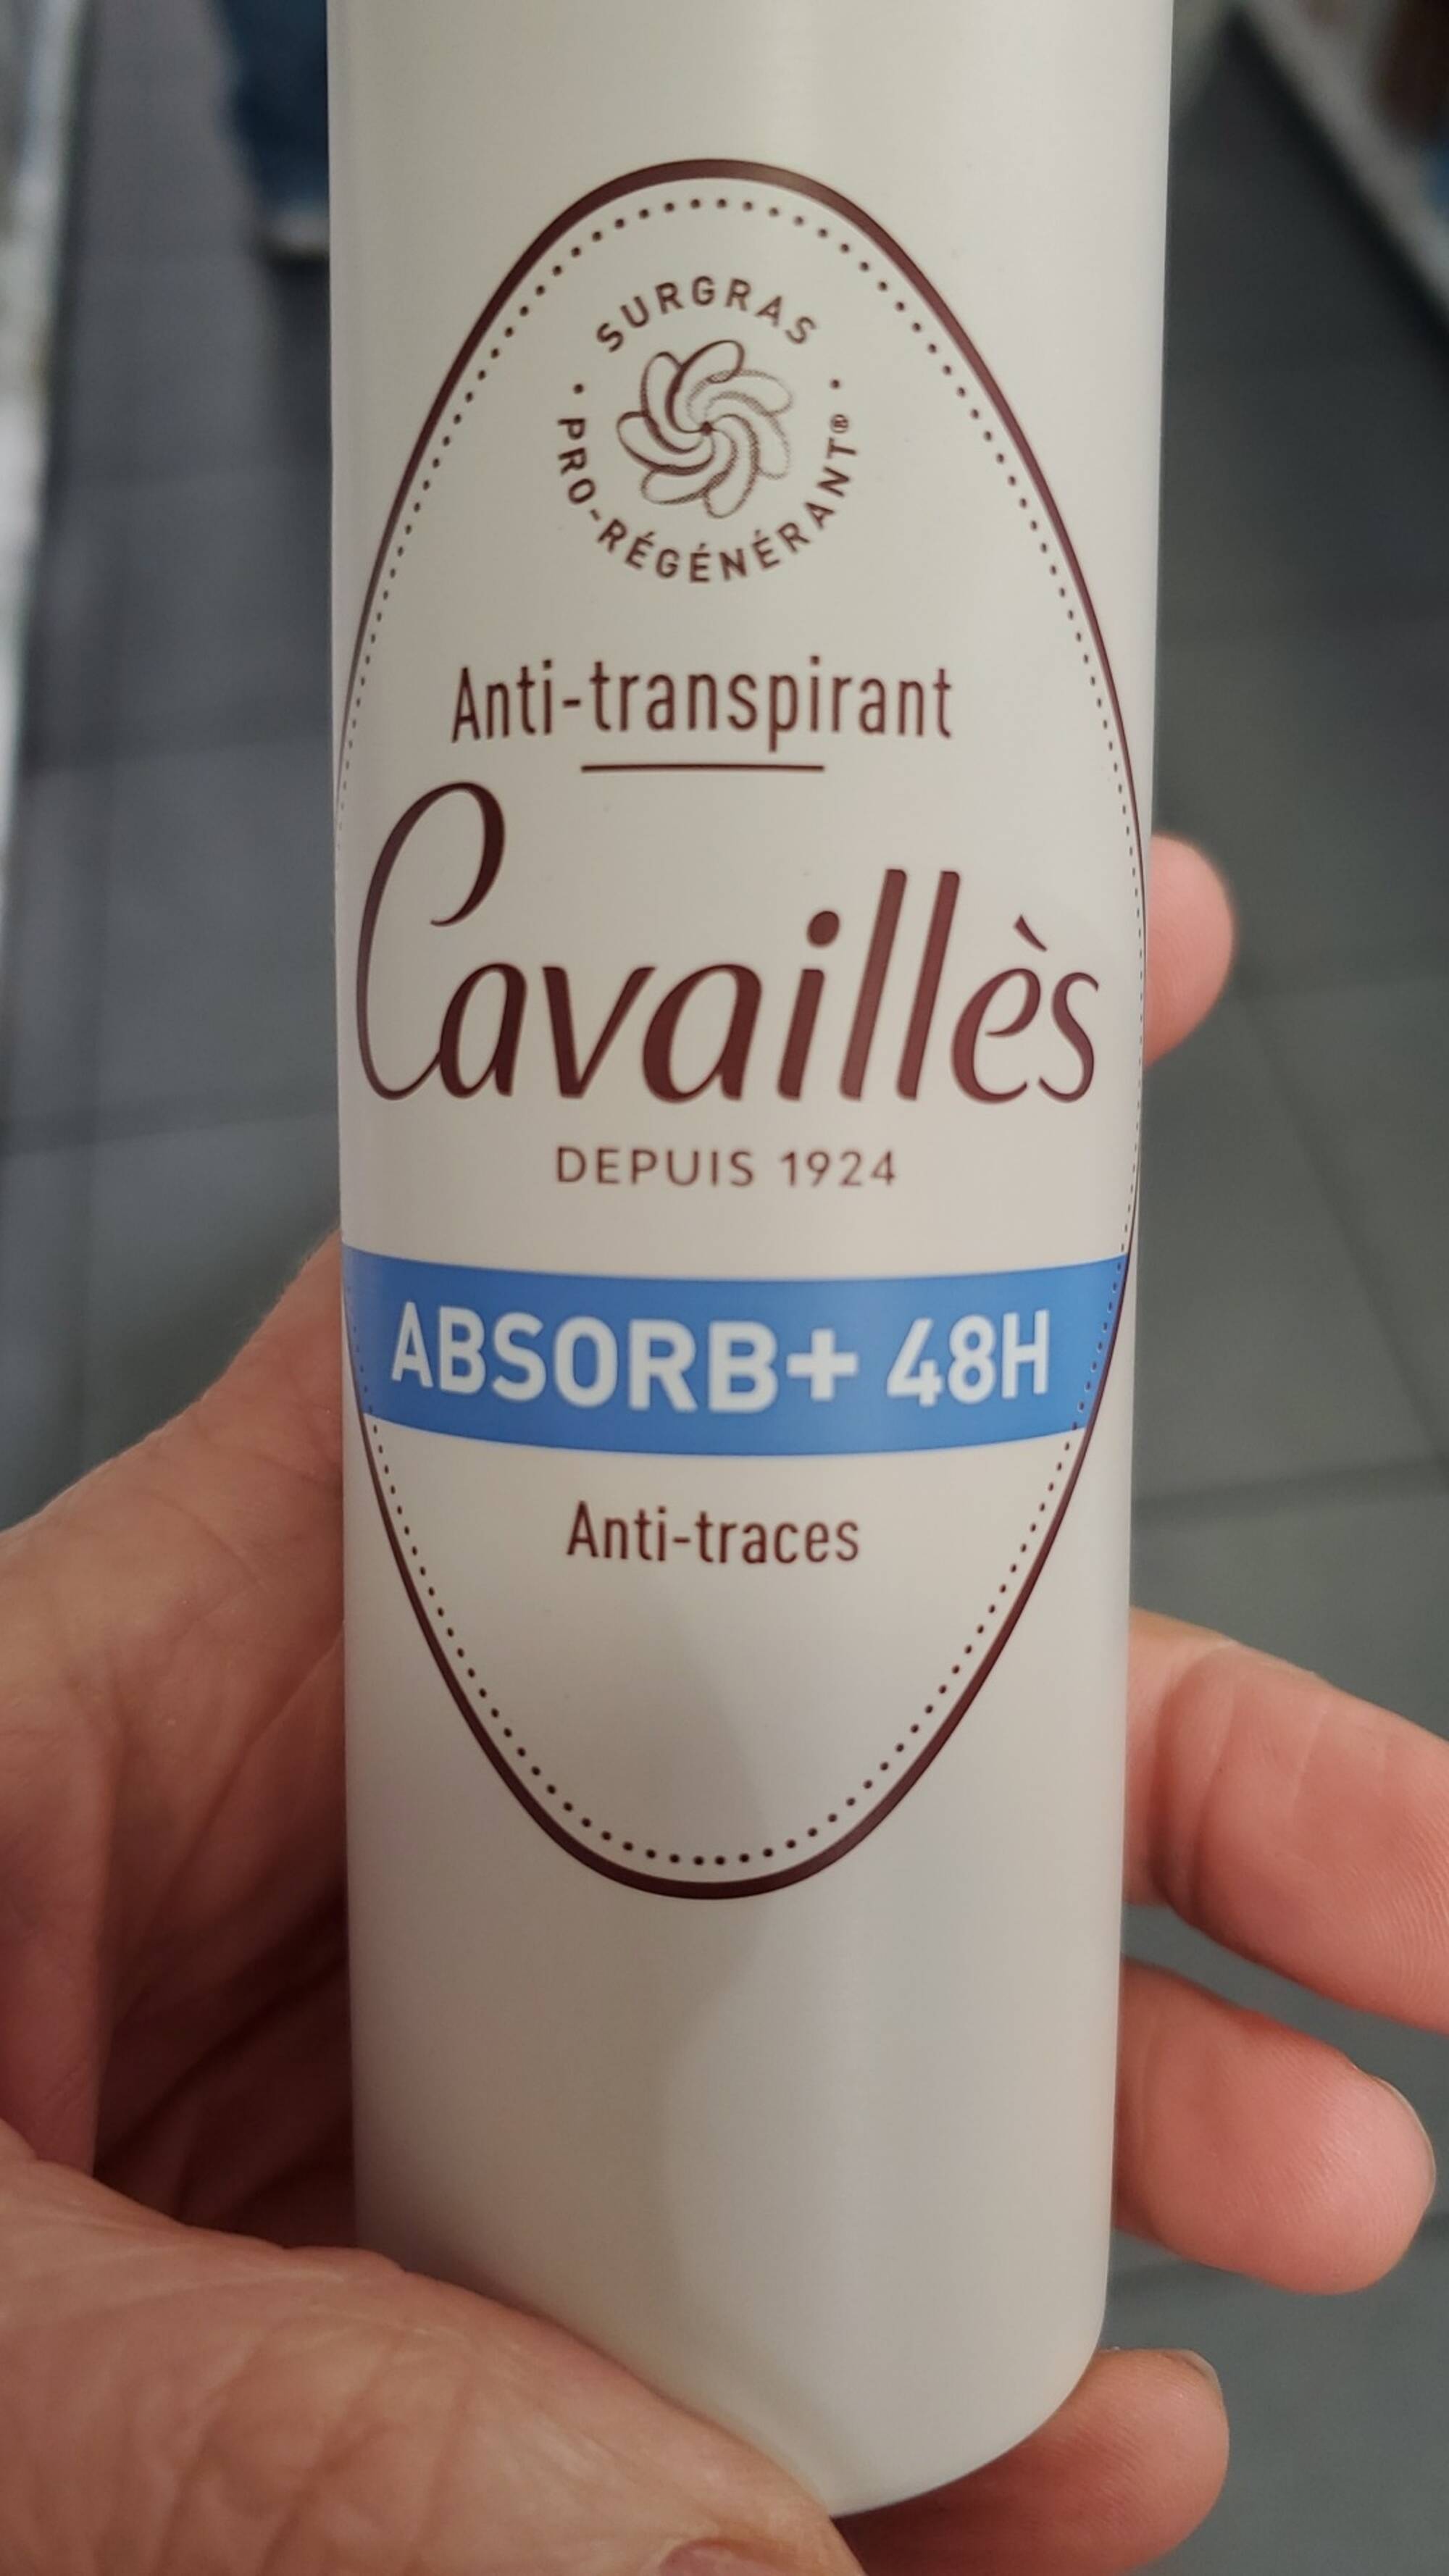 CAVAILLES - Anti-transpirant Absorb+ 48h